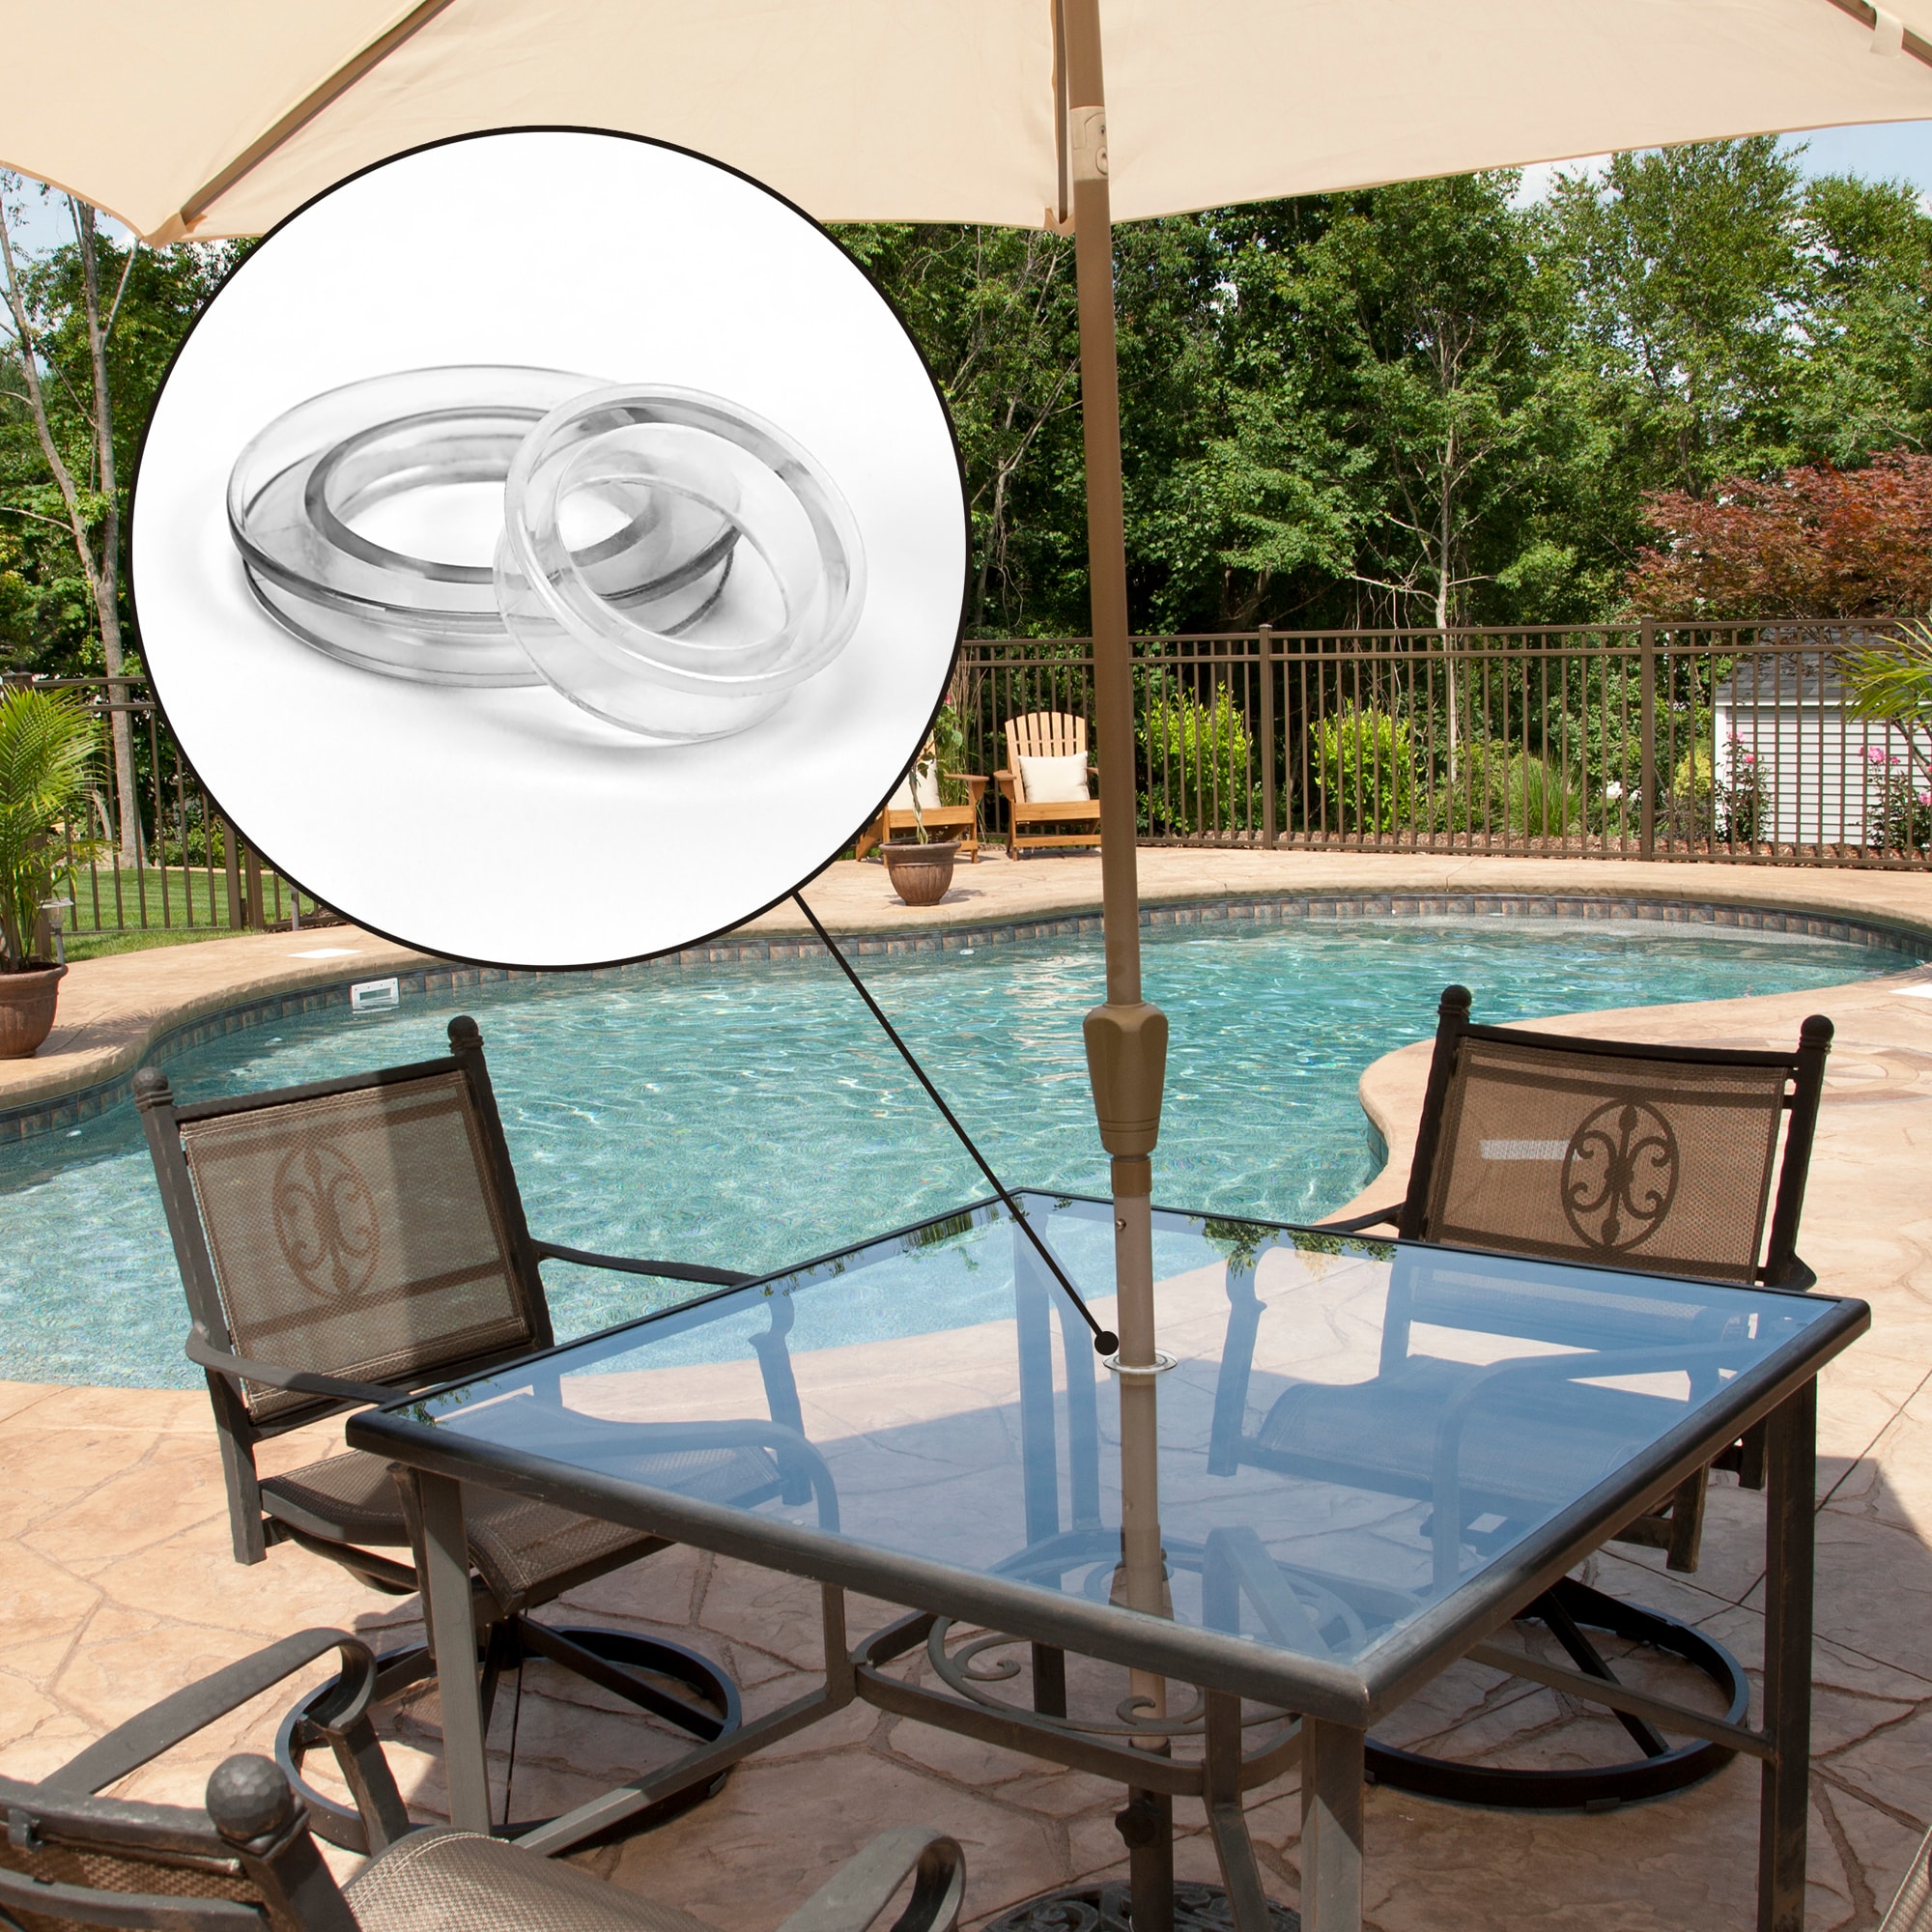 2" Umbrella Hole Ring Plug Set Glass Outdoors Patio Table Clear Deck Yard TWO 